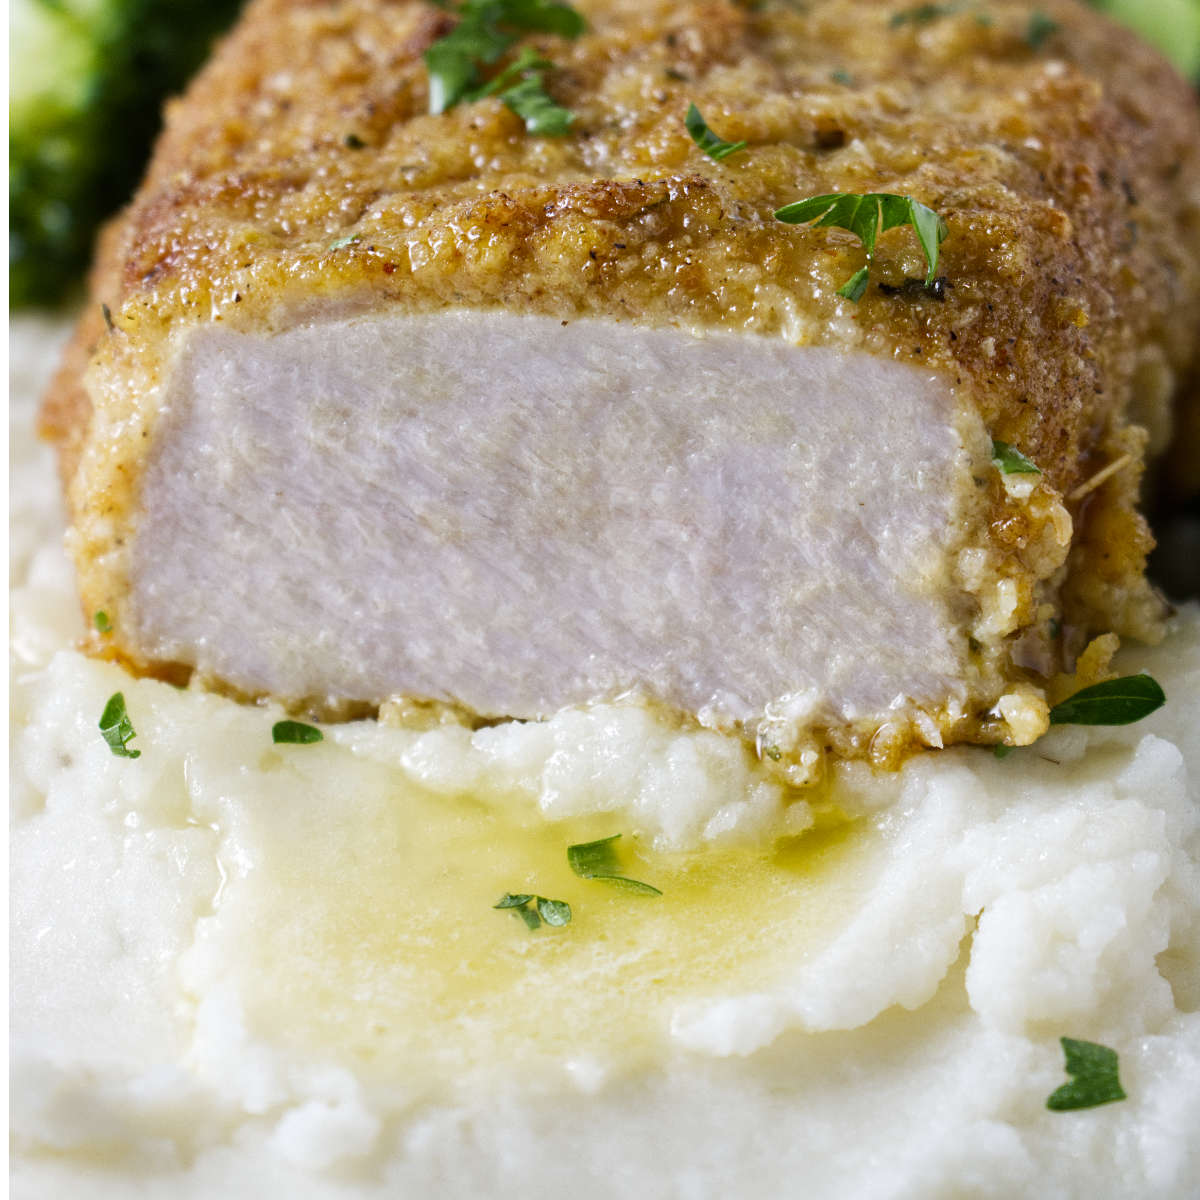 A breaded pork chop in a bed of mashed potatoes.